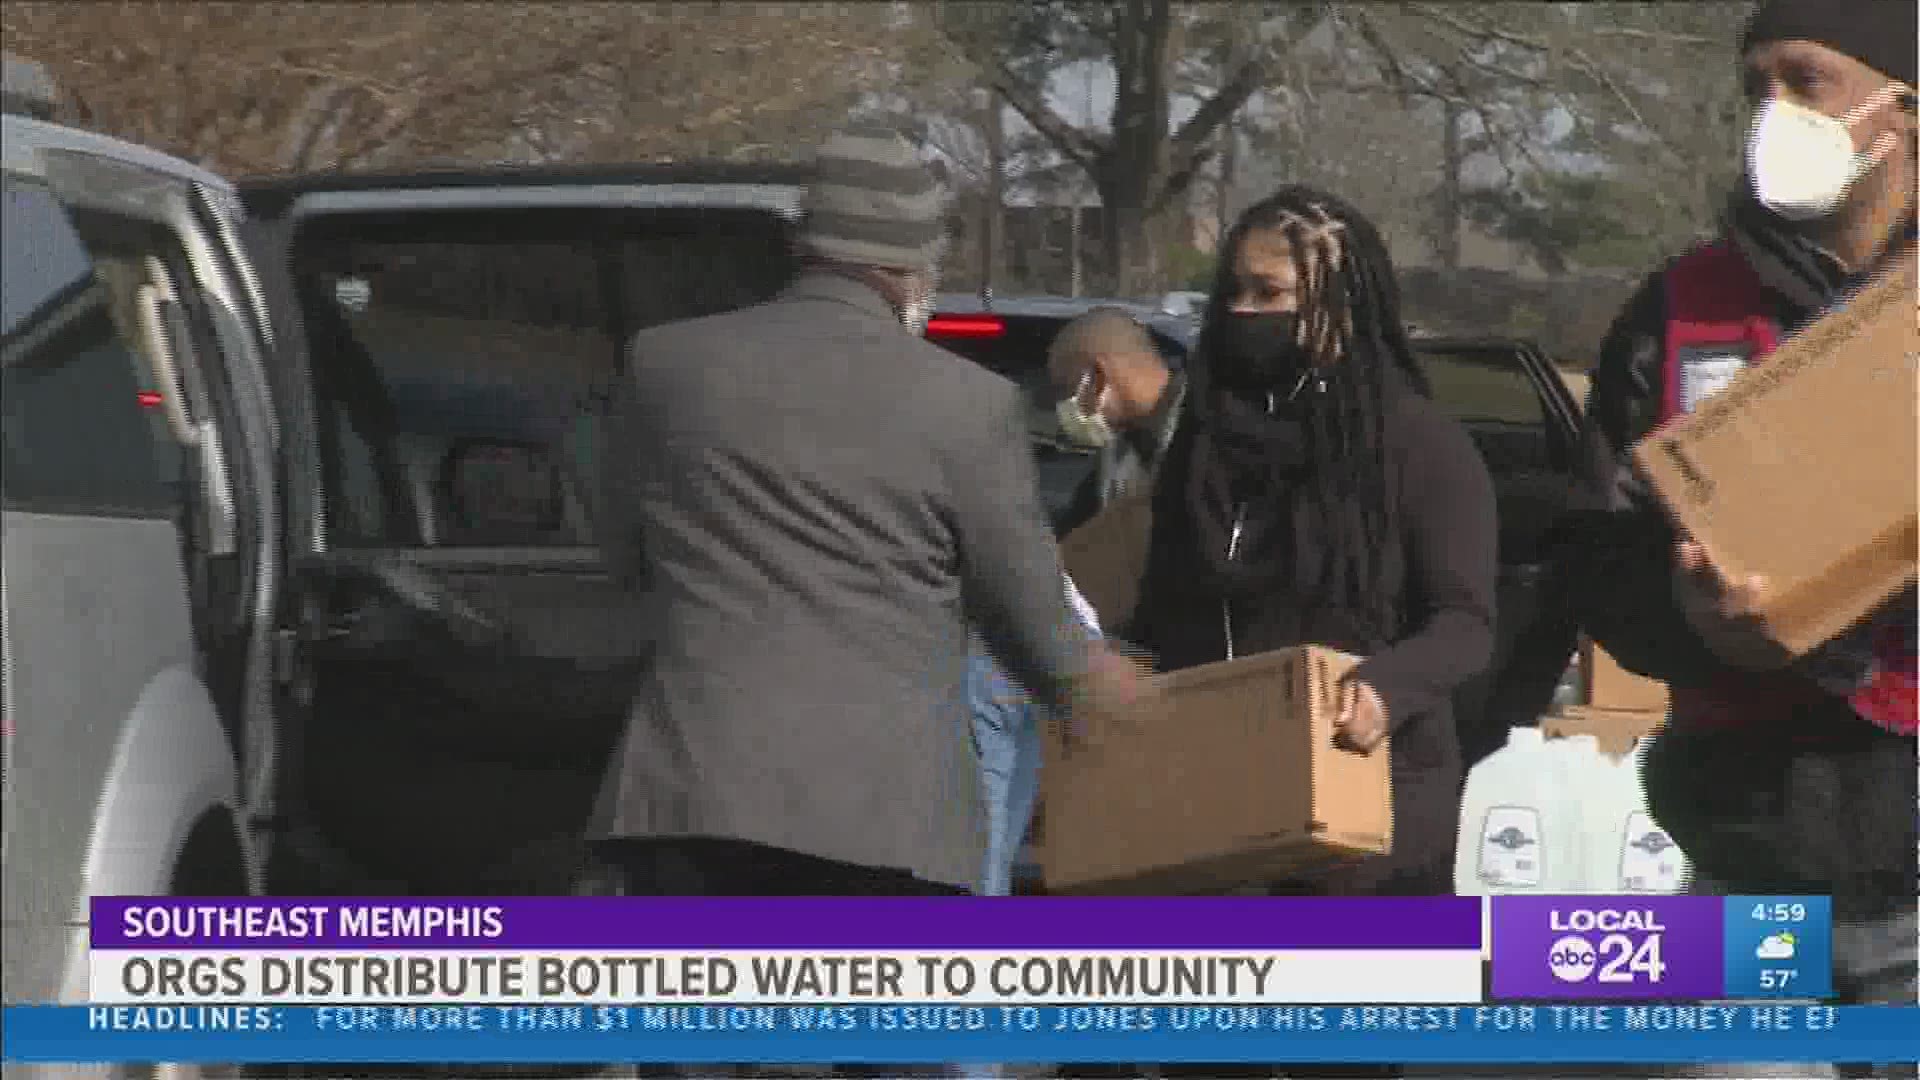 More free water was handed out Thursday for people affected by MLGW’s boil water advisory